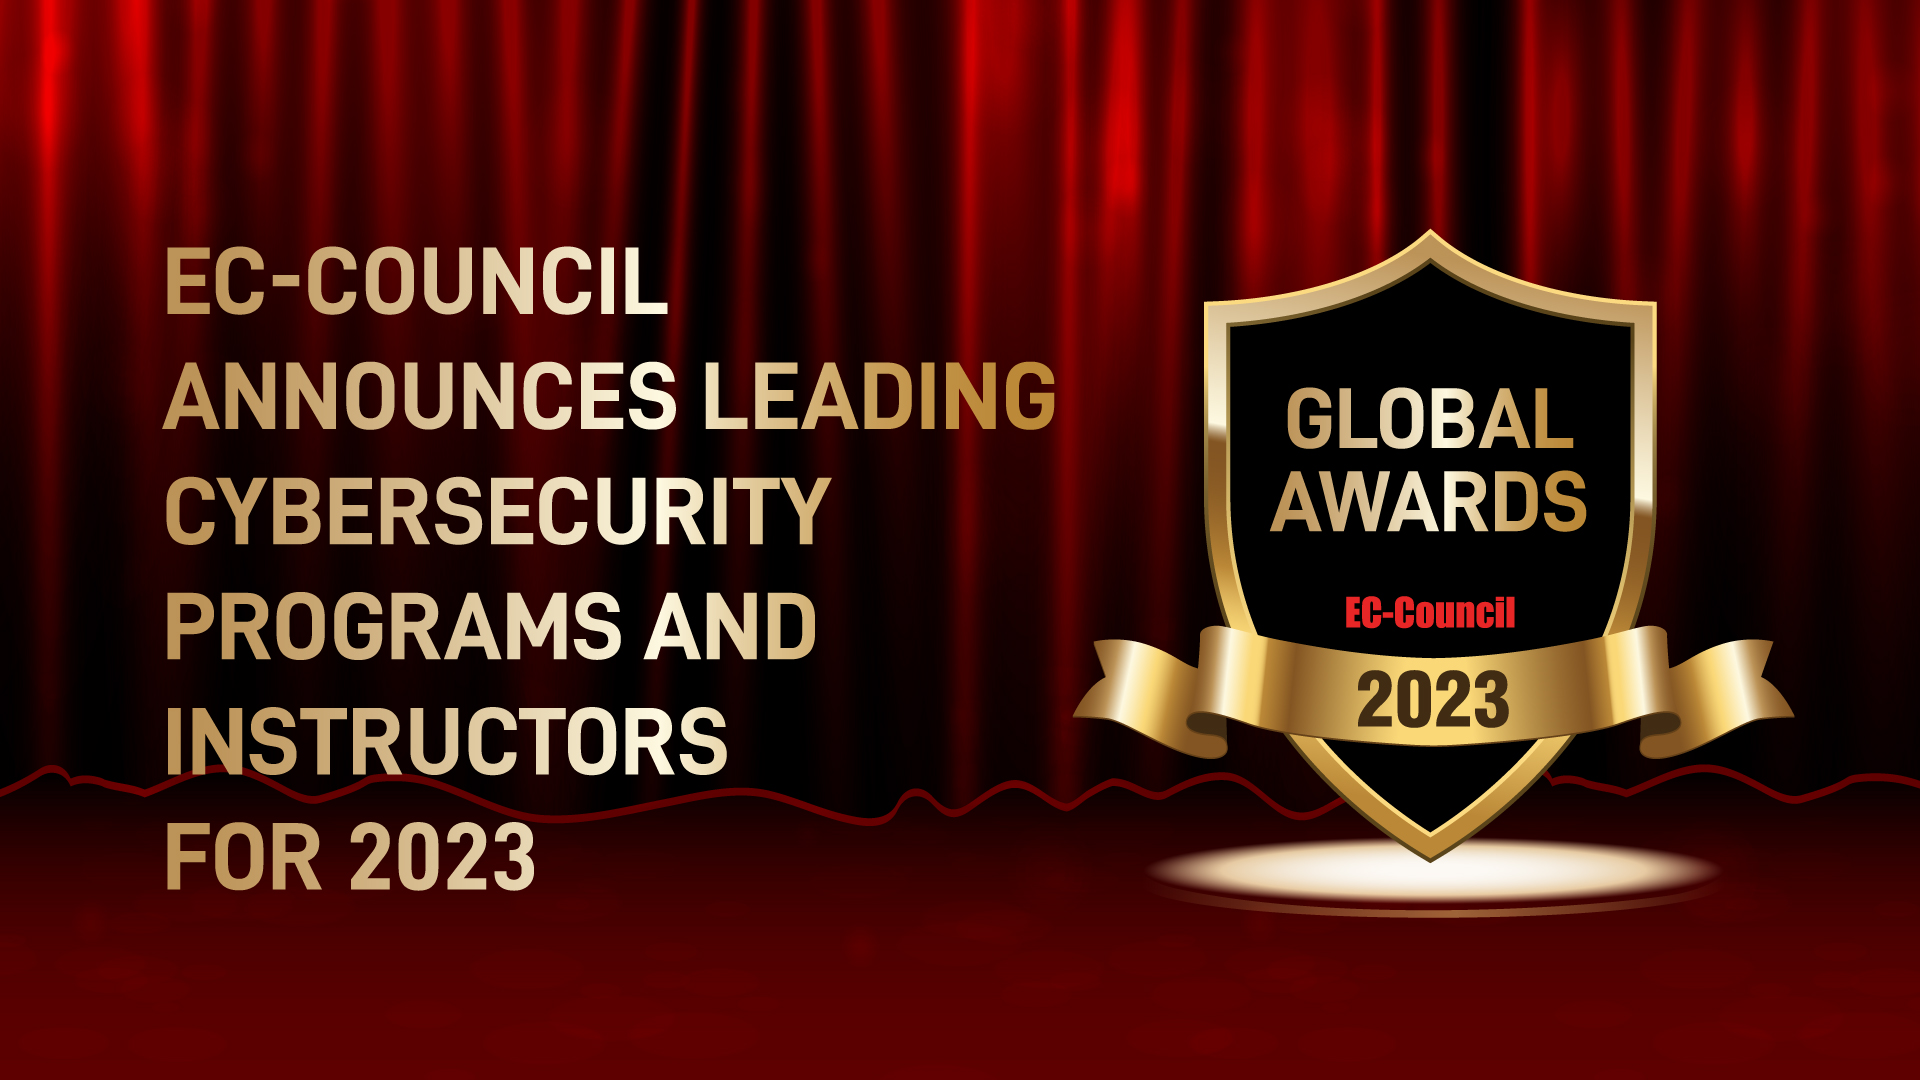 EC-Council Announces Leading Cybersecurity Programs and Instructors for 2023